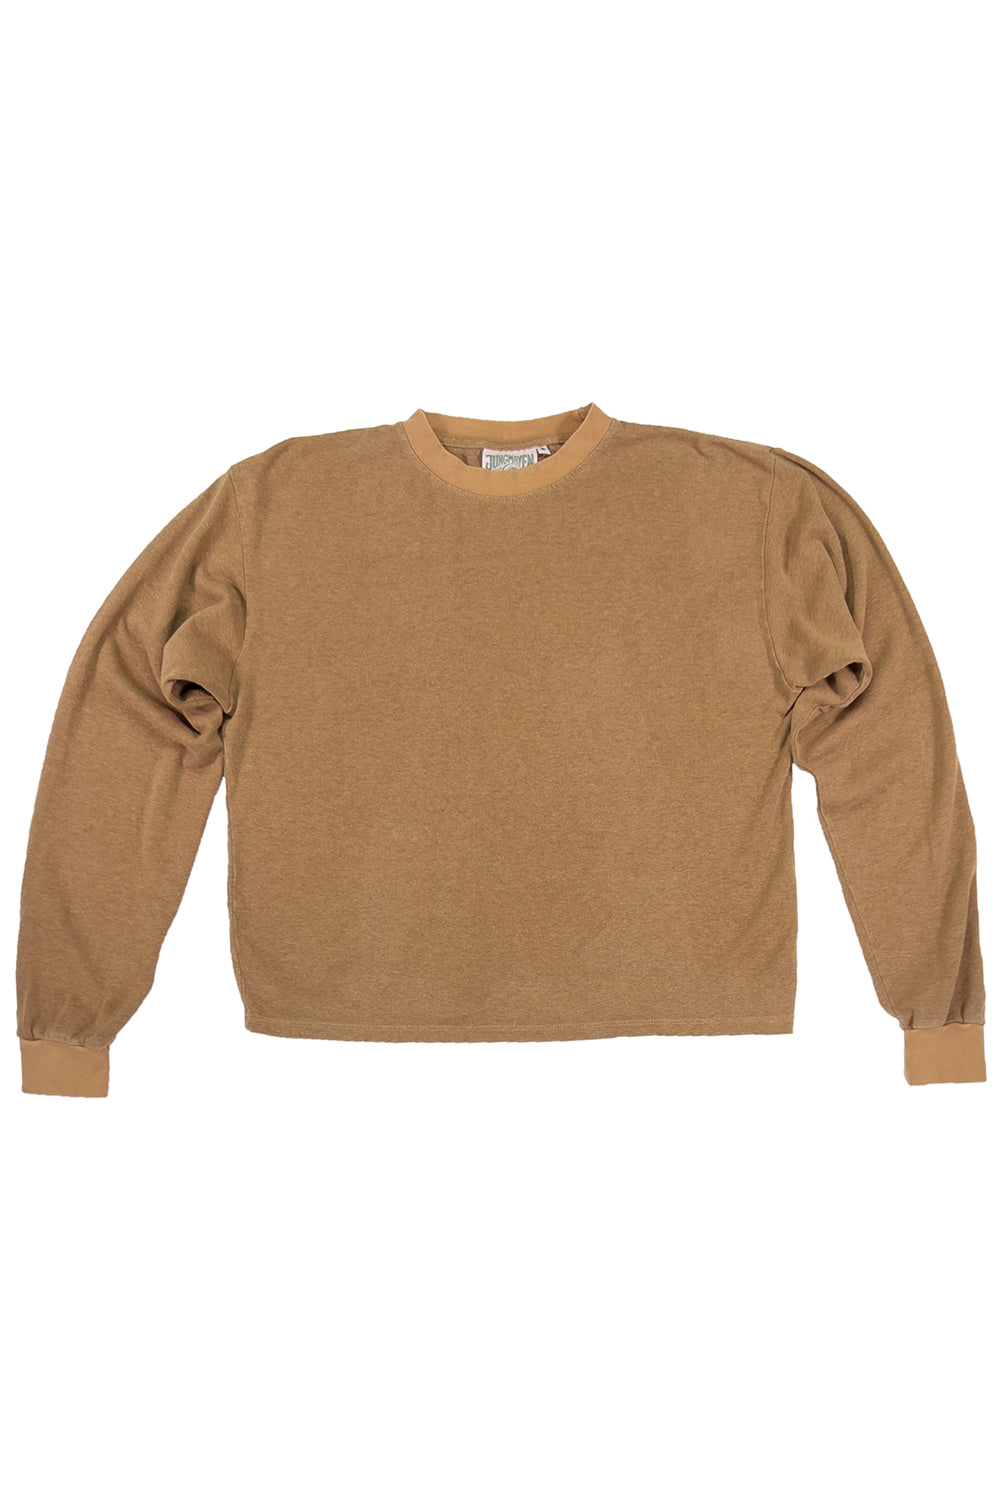 Tatoosh Cropped Long Sleeve Tee | Jungmaven Hemp Clothing & Accessories / Color: Coyote